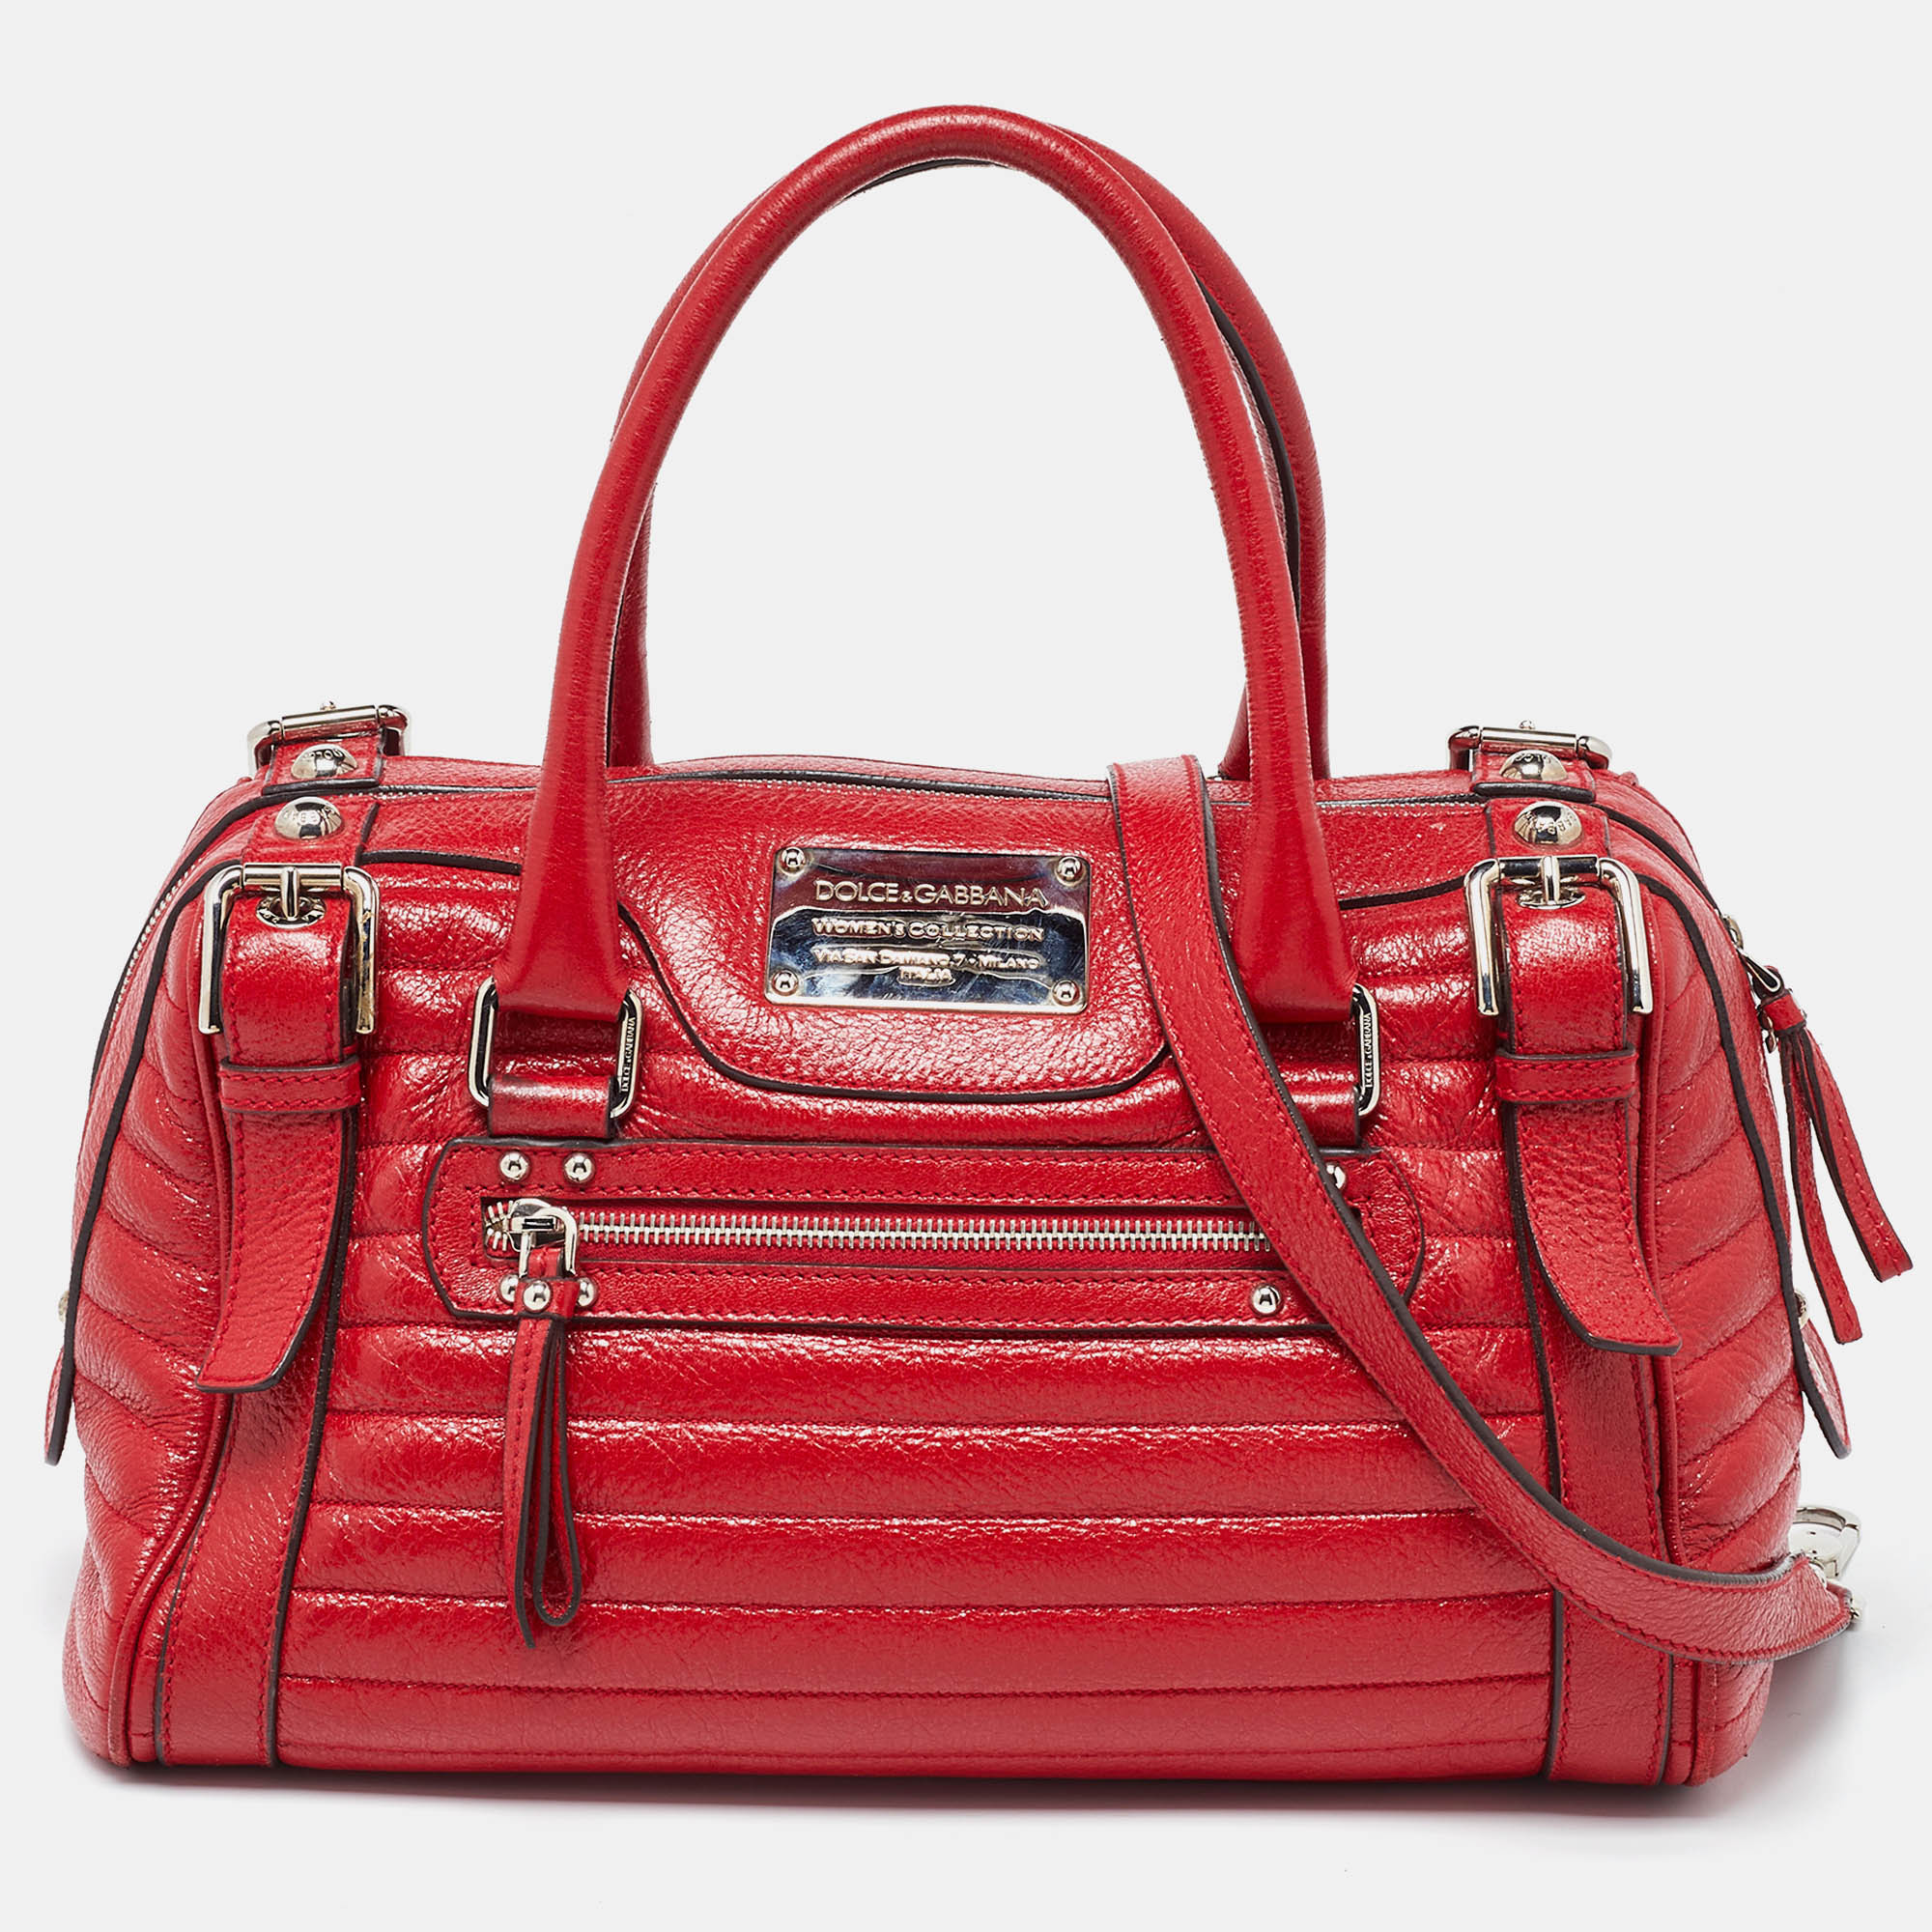 

Dolce & Gabbana Red Leather Miss Easy Way Satchel